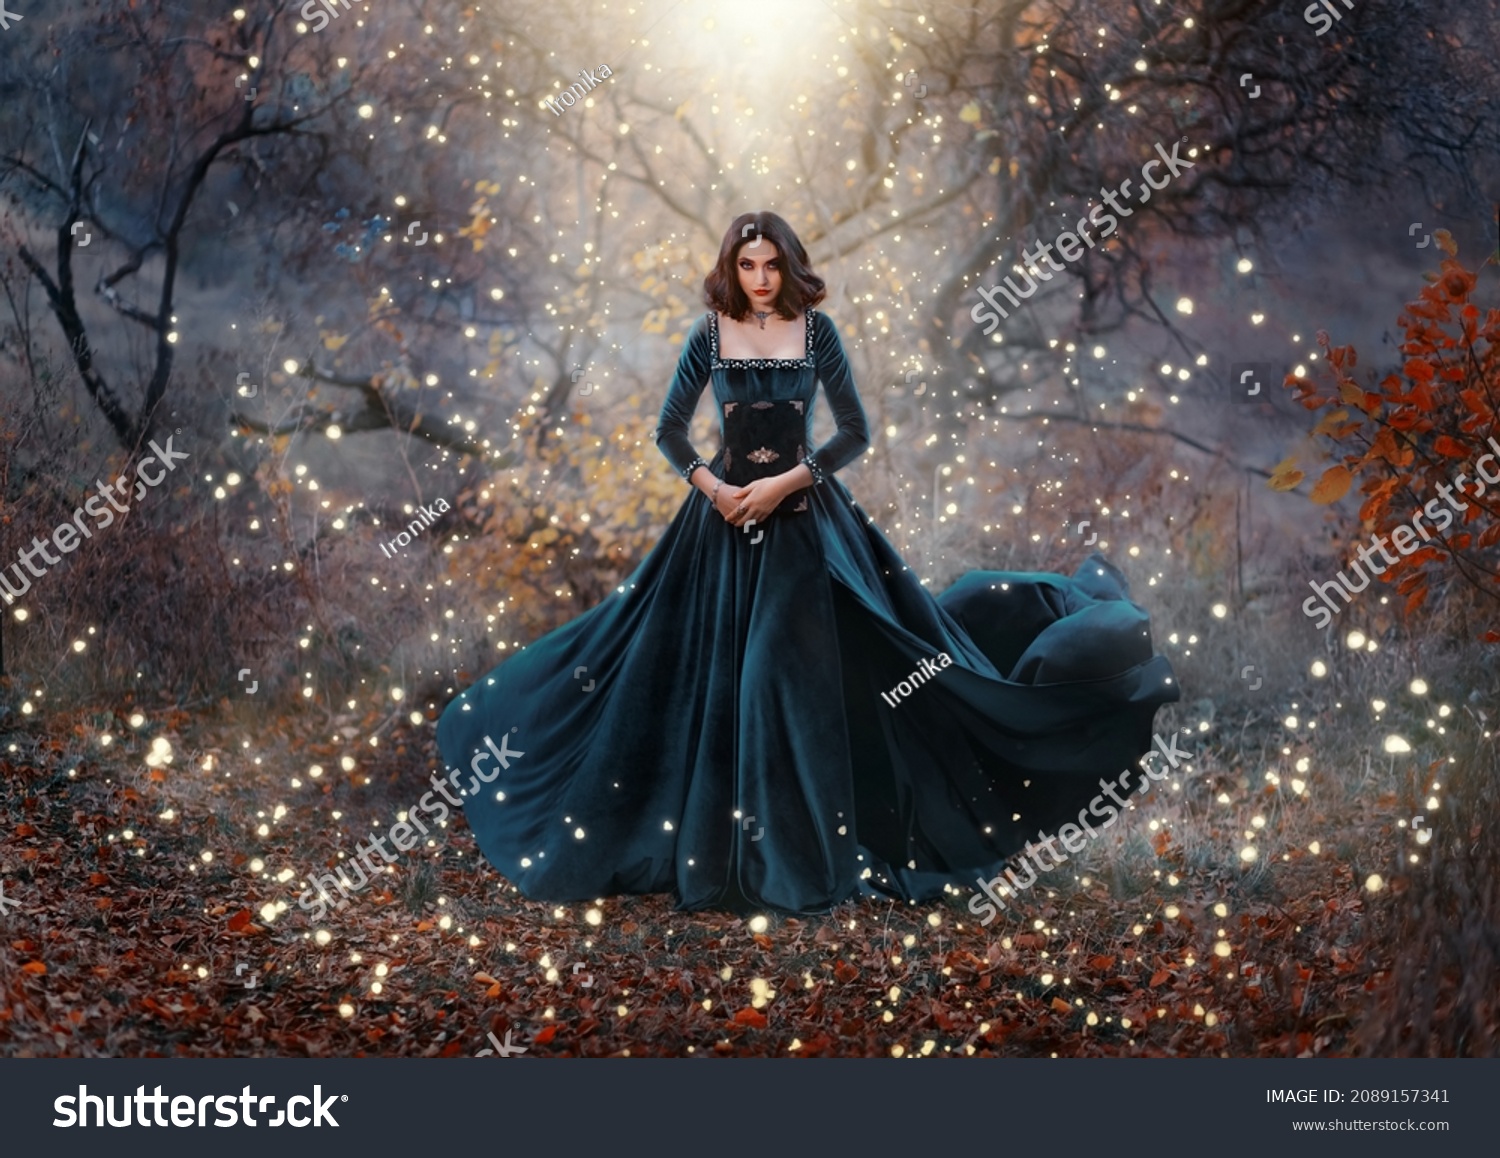 Gothic fantasy woman witch holding magic book hands. Long black velvet medieval vintage dress flies wind. Girl conjures. Bright divine light glow sparkles magic circle around lady. Autumn forest tree #2089157341